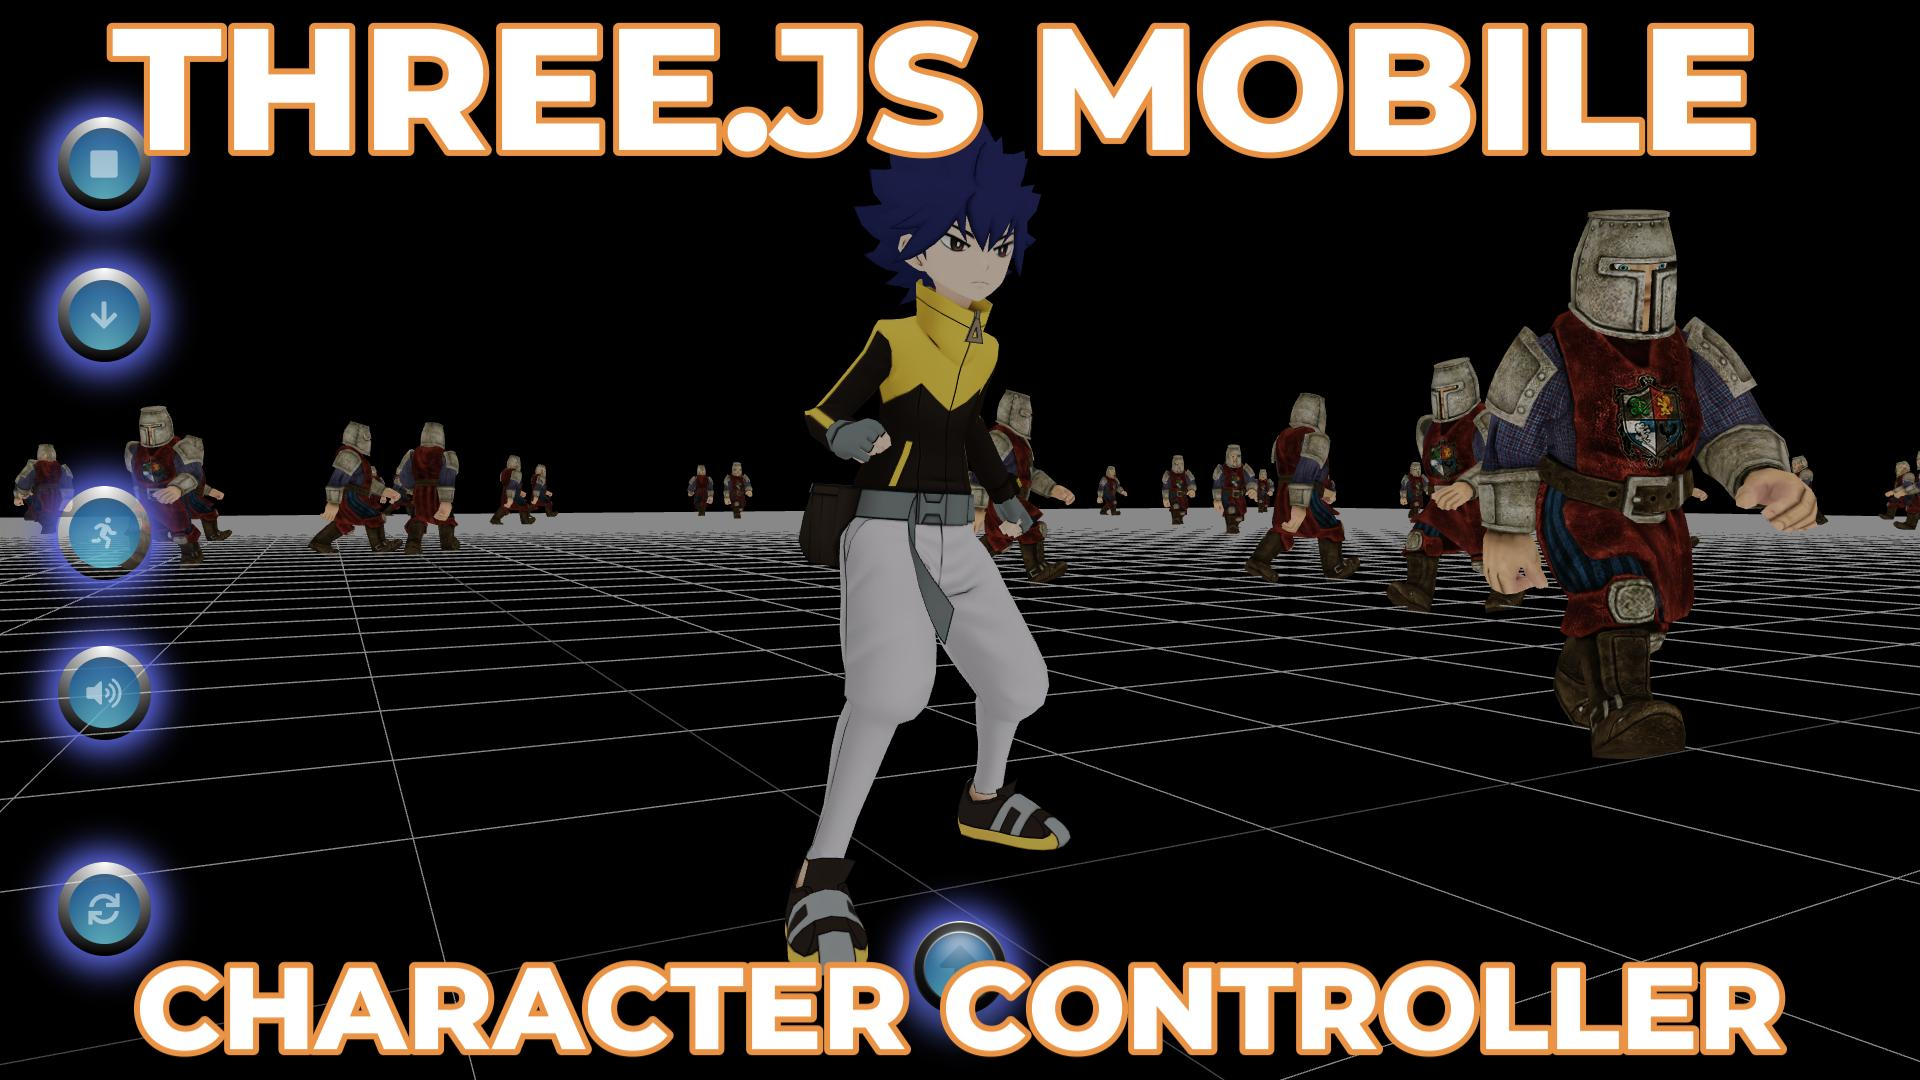 Three.js Mobile Character Controller